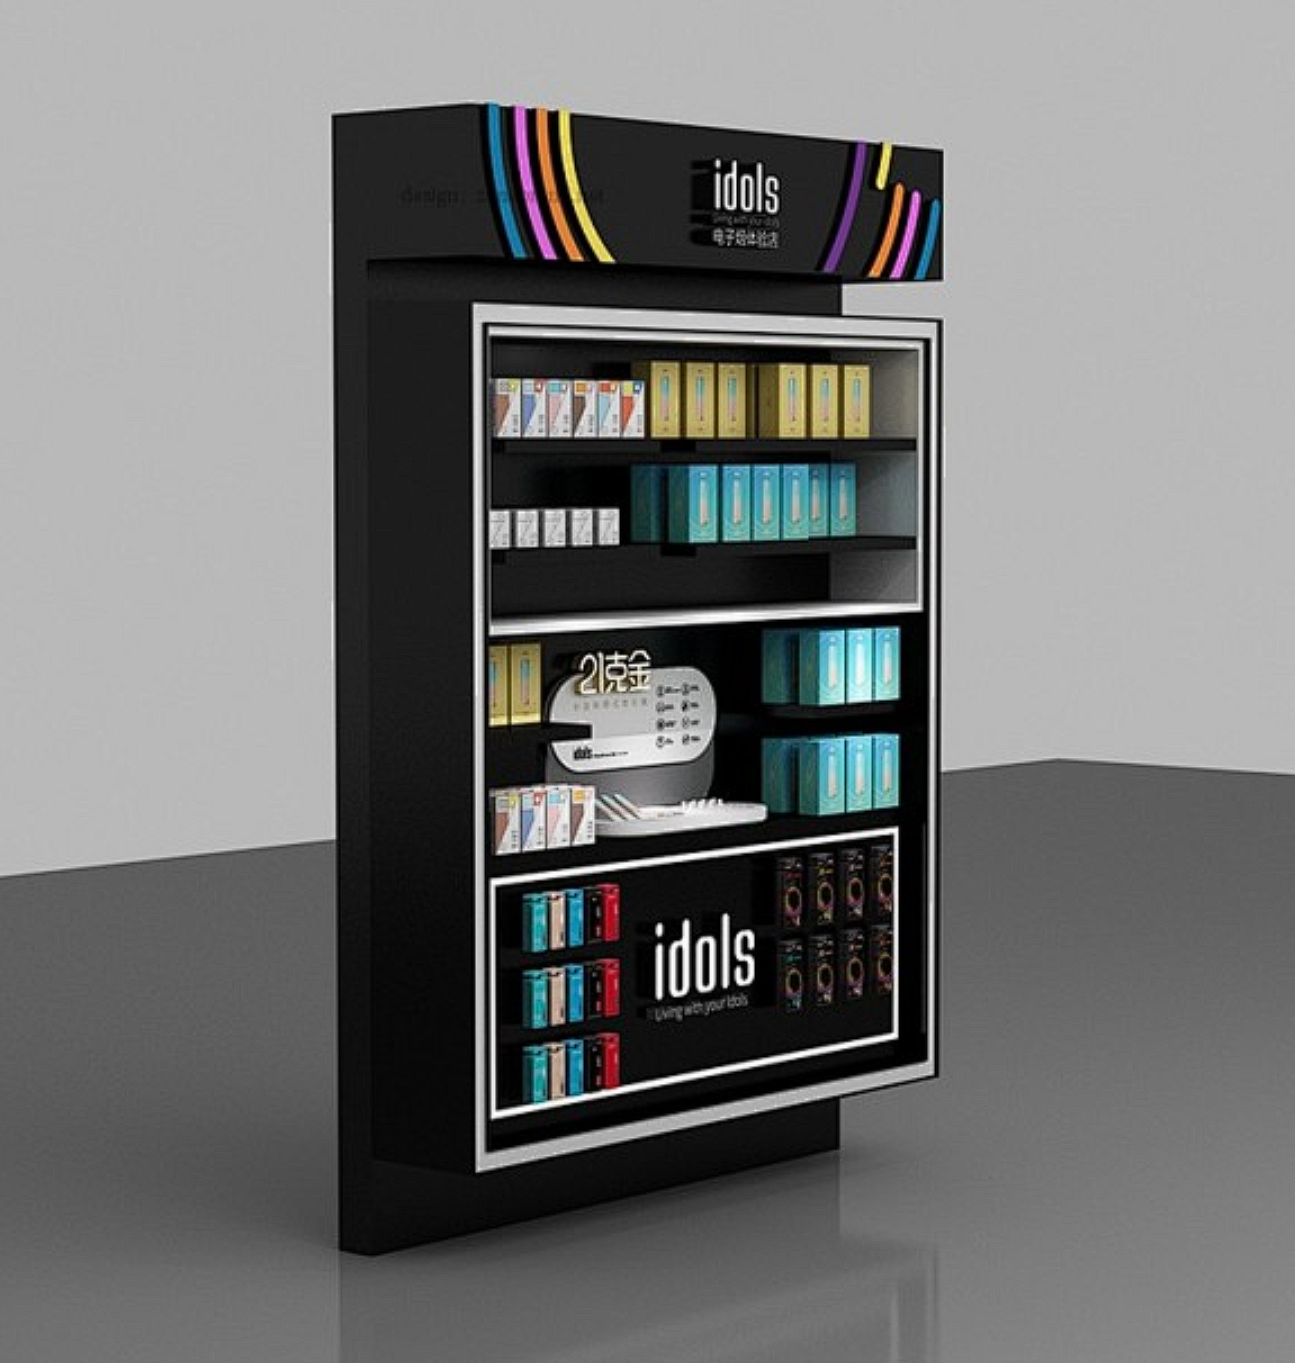 How To Customize Vape Display Cabinet ？Choose Vape Display Cabinet Factory Or Design Company